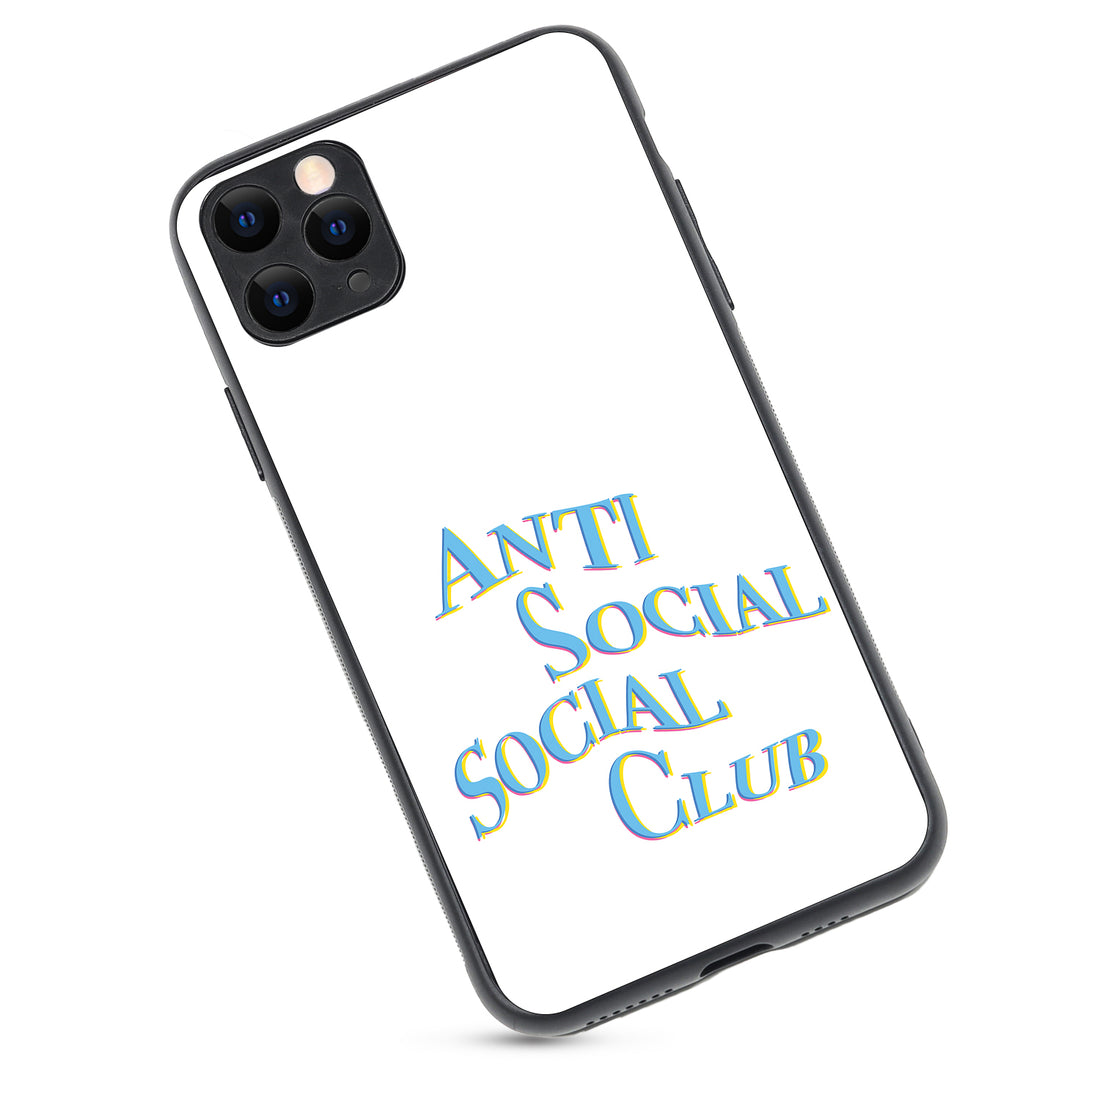 Social Club Motivational Quotes iPhone 11 Pro Max Case